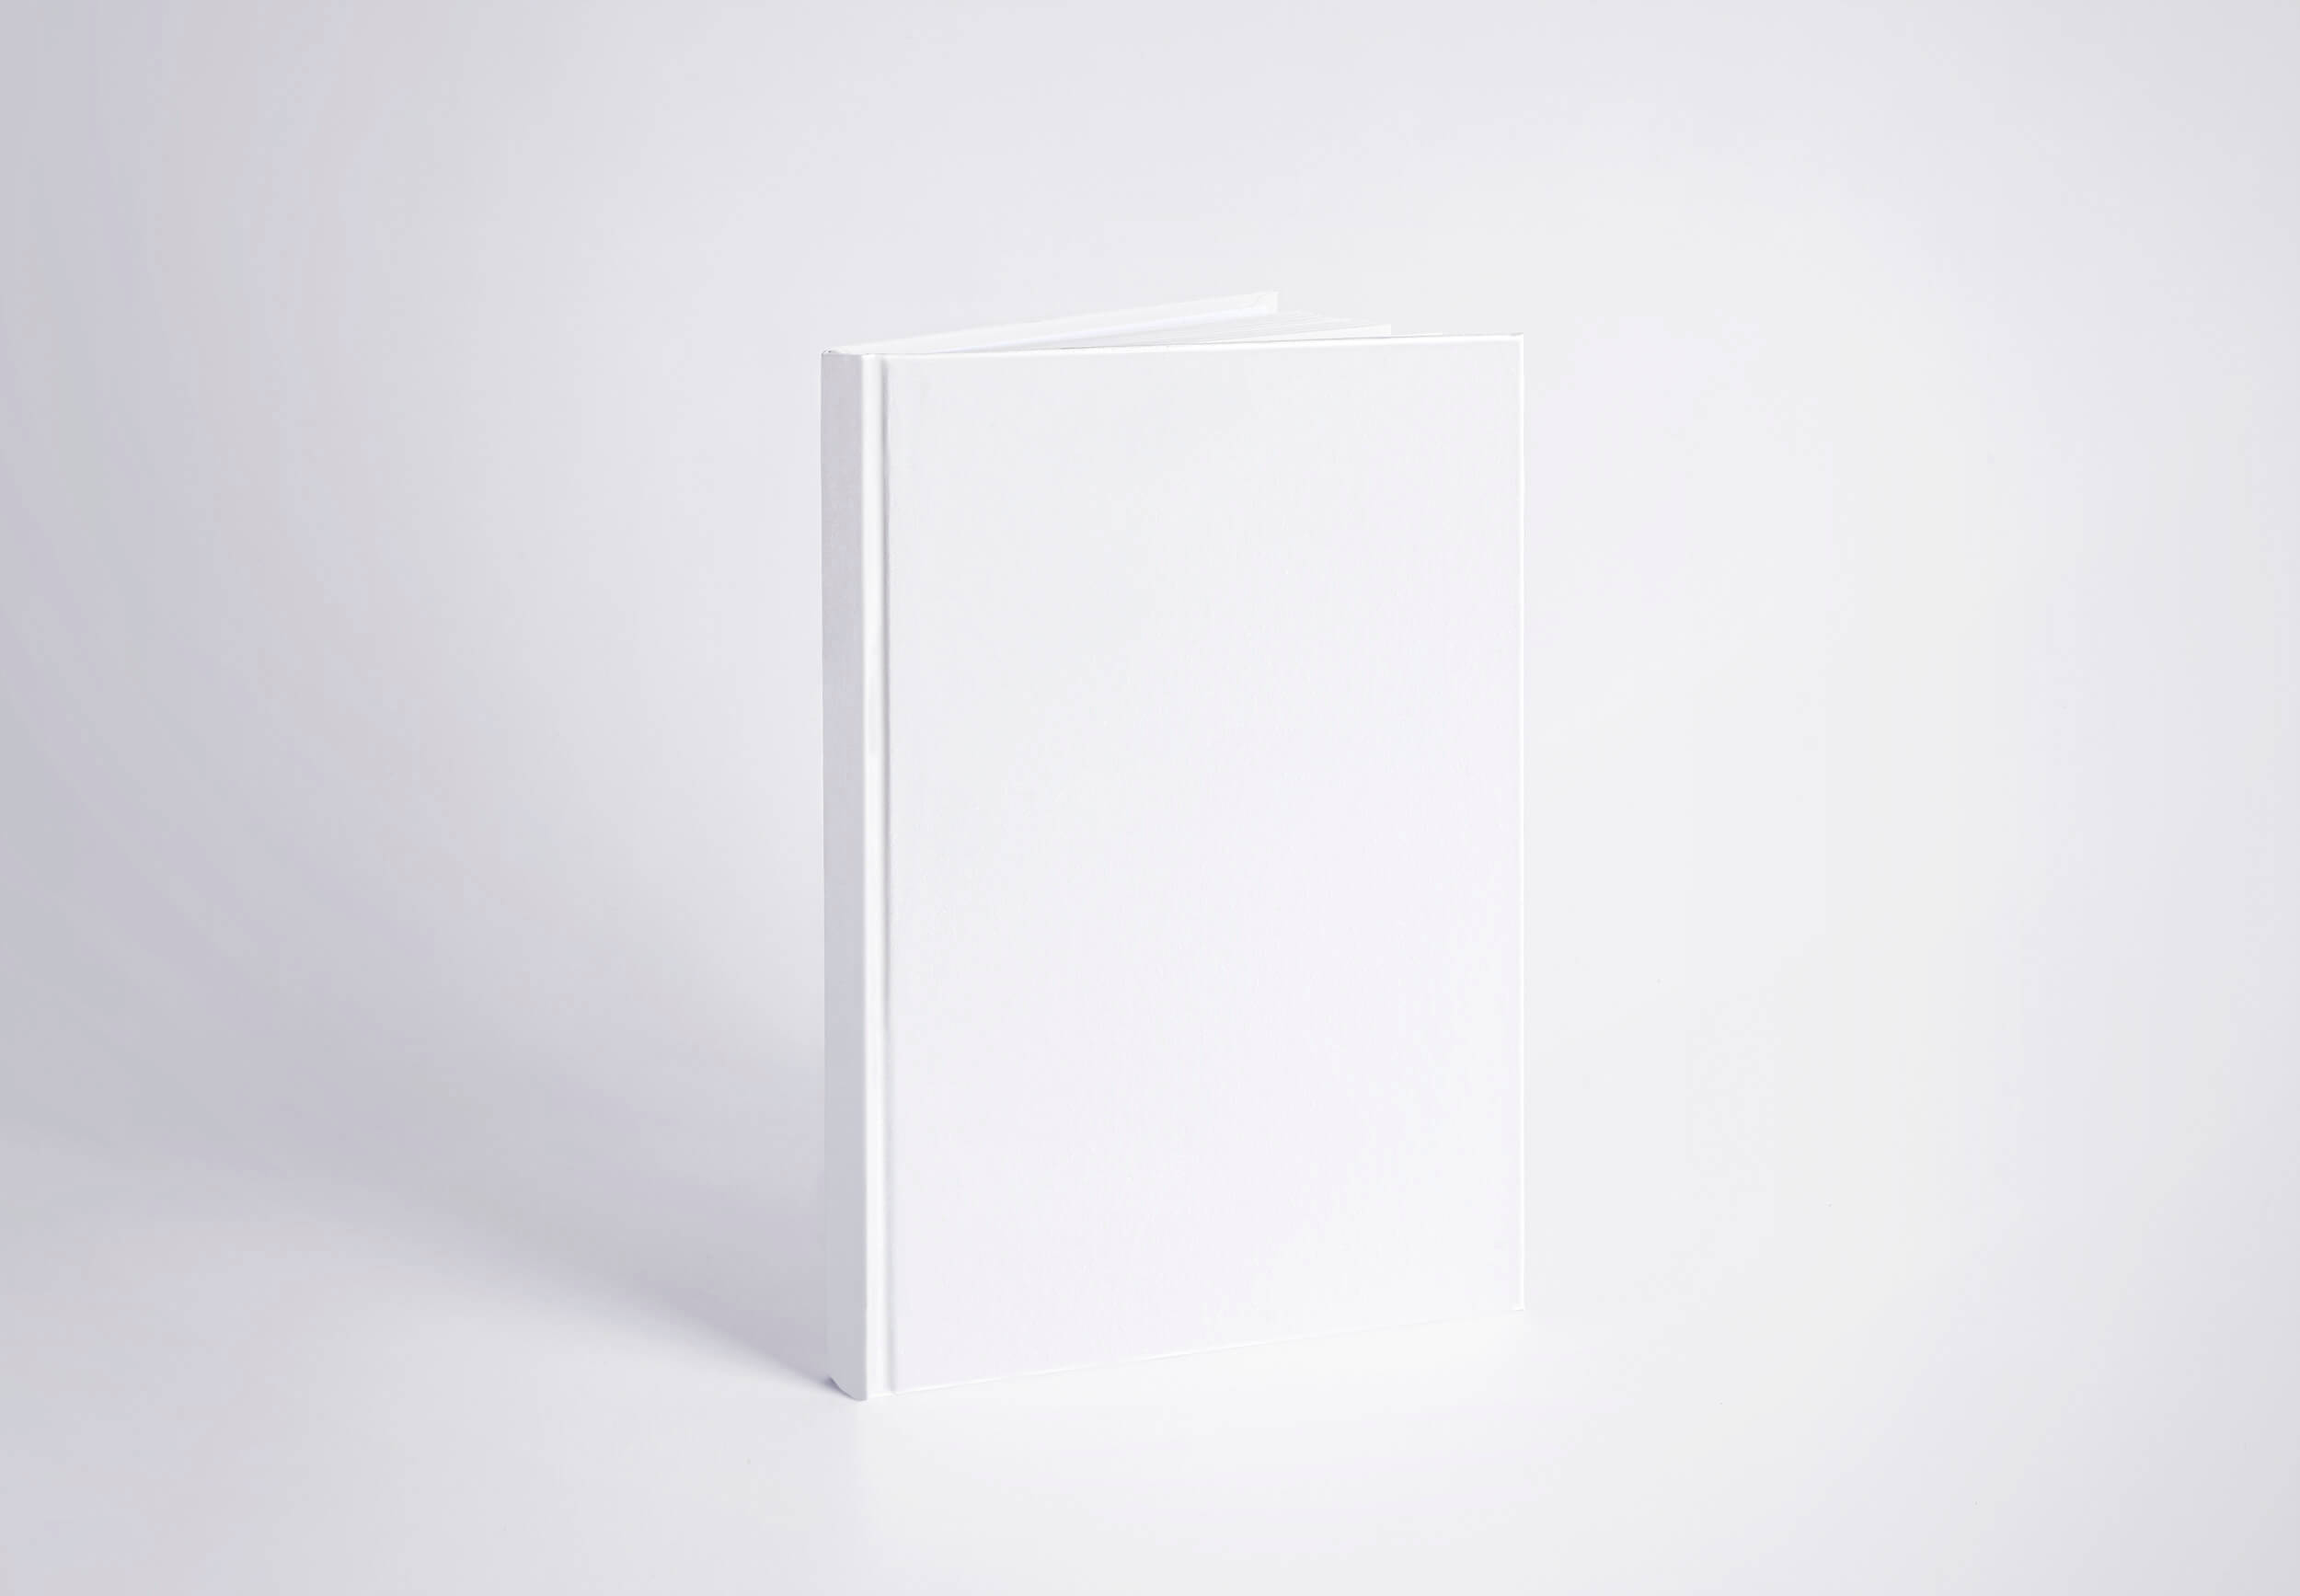 Standing Book Mockup Free Download